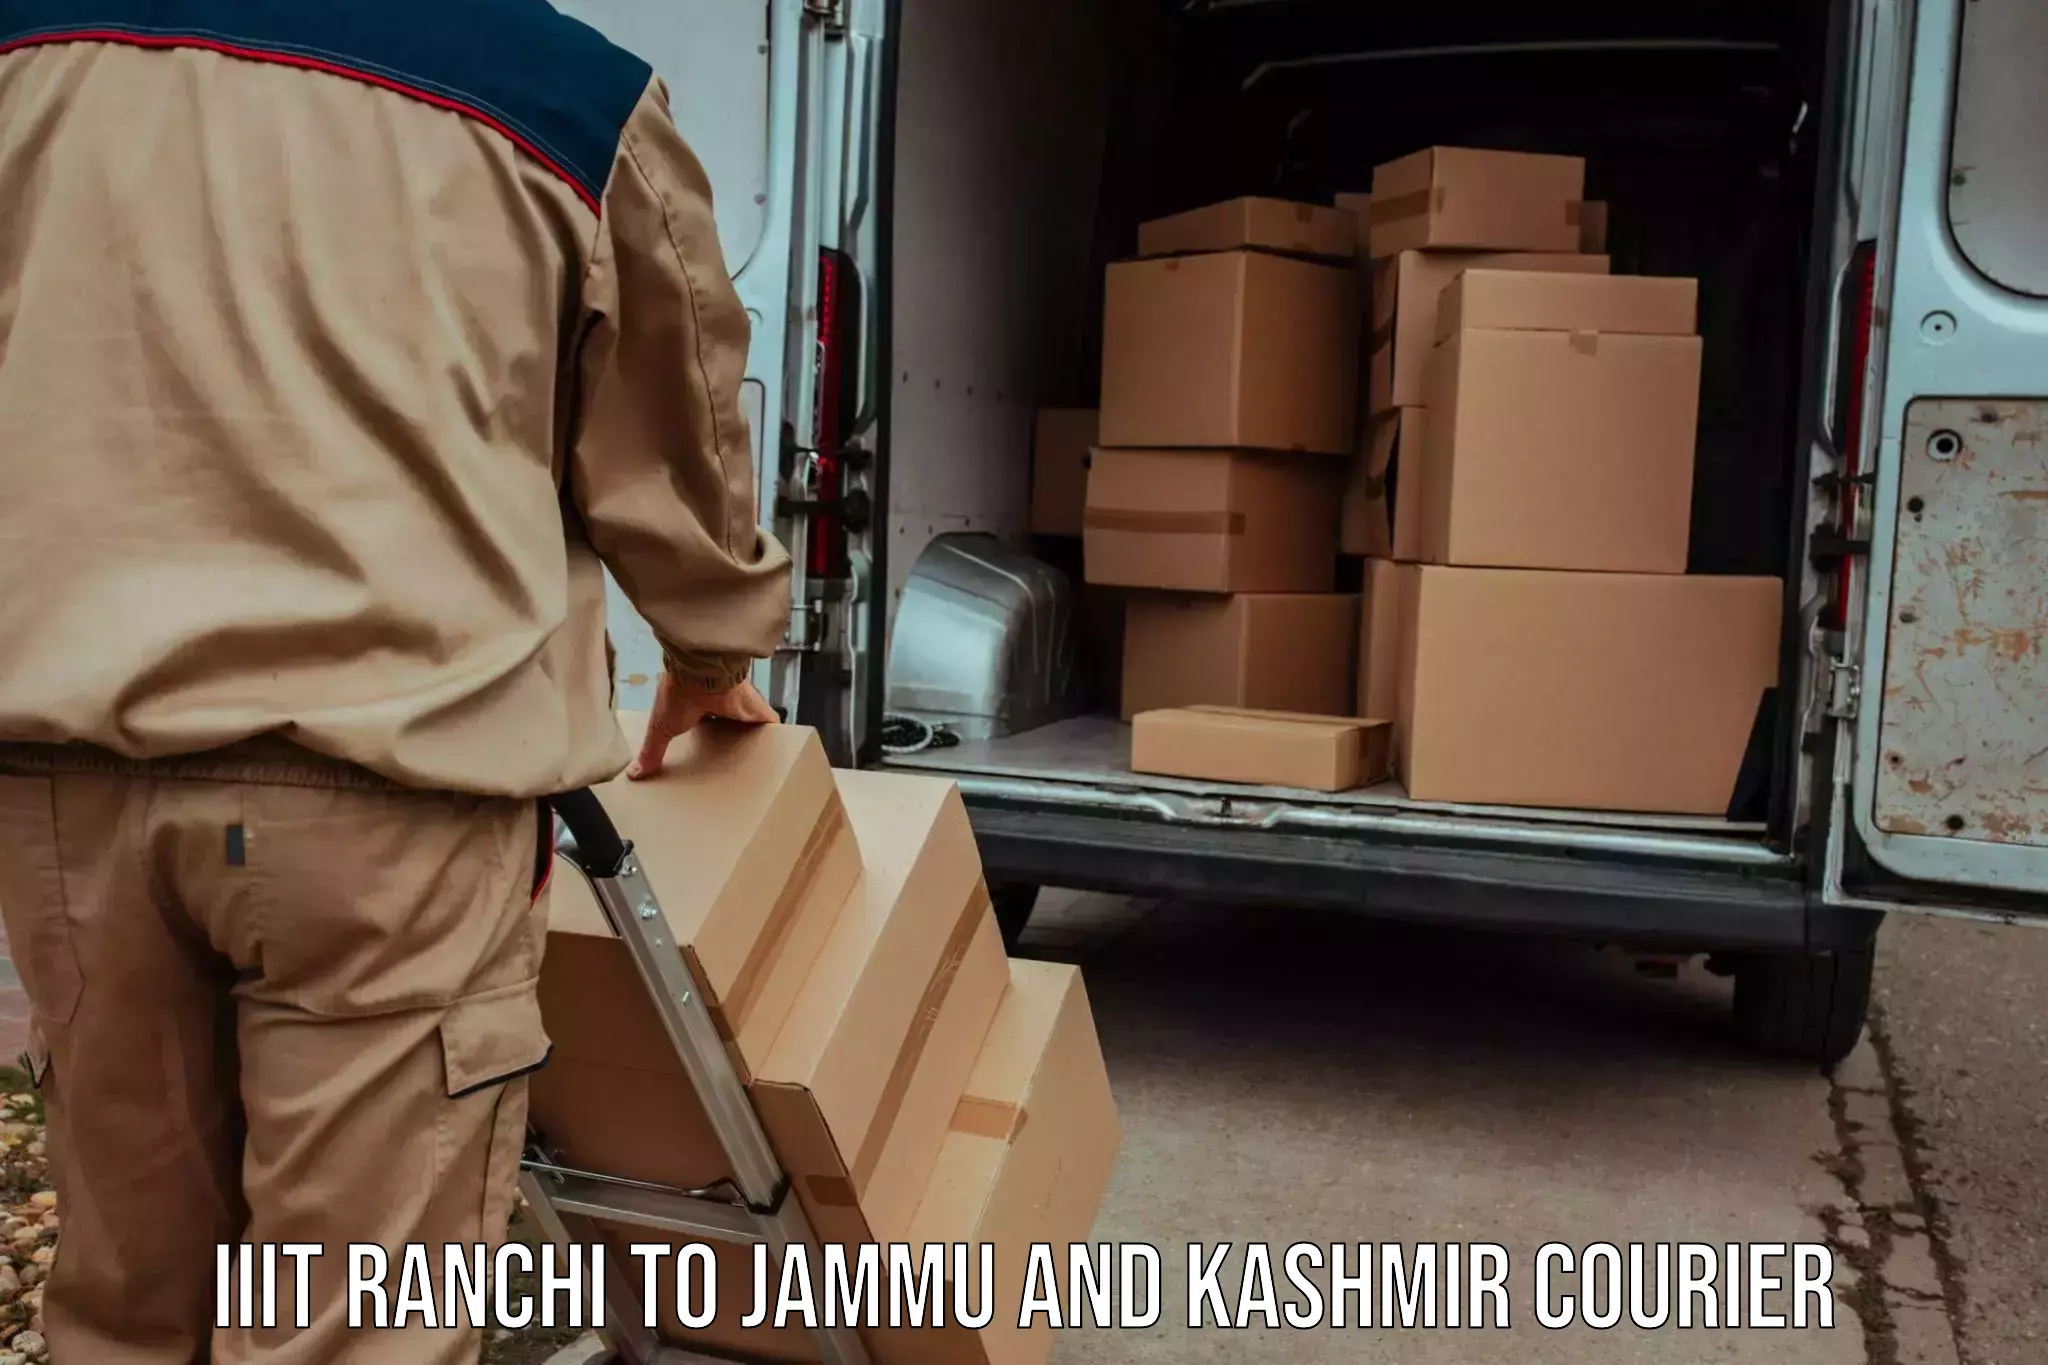 Courier service innovation in IIIT Ranchi to Jakh